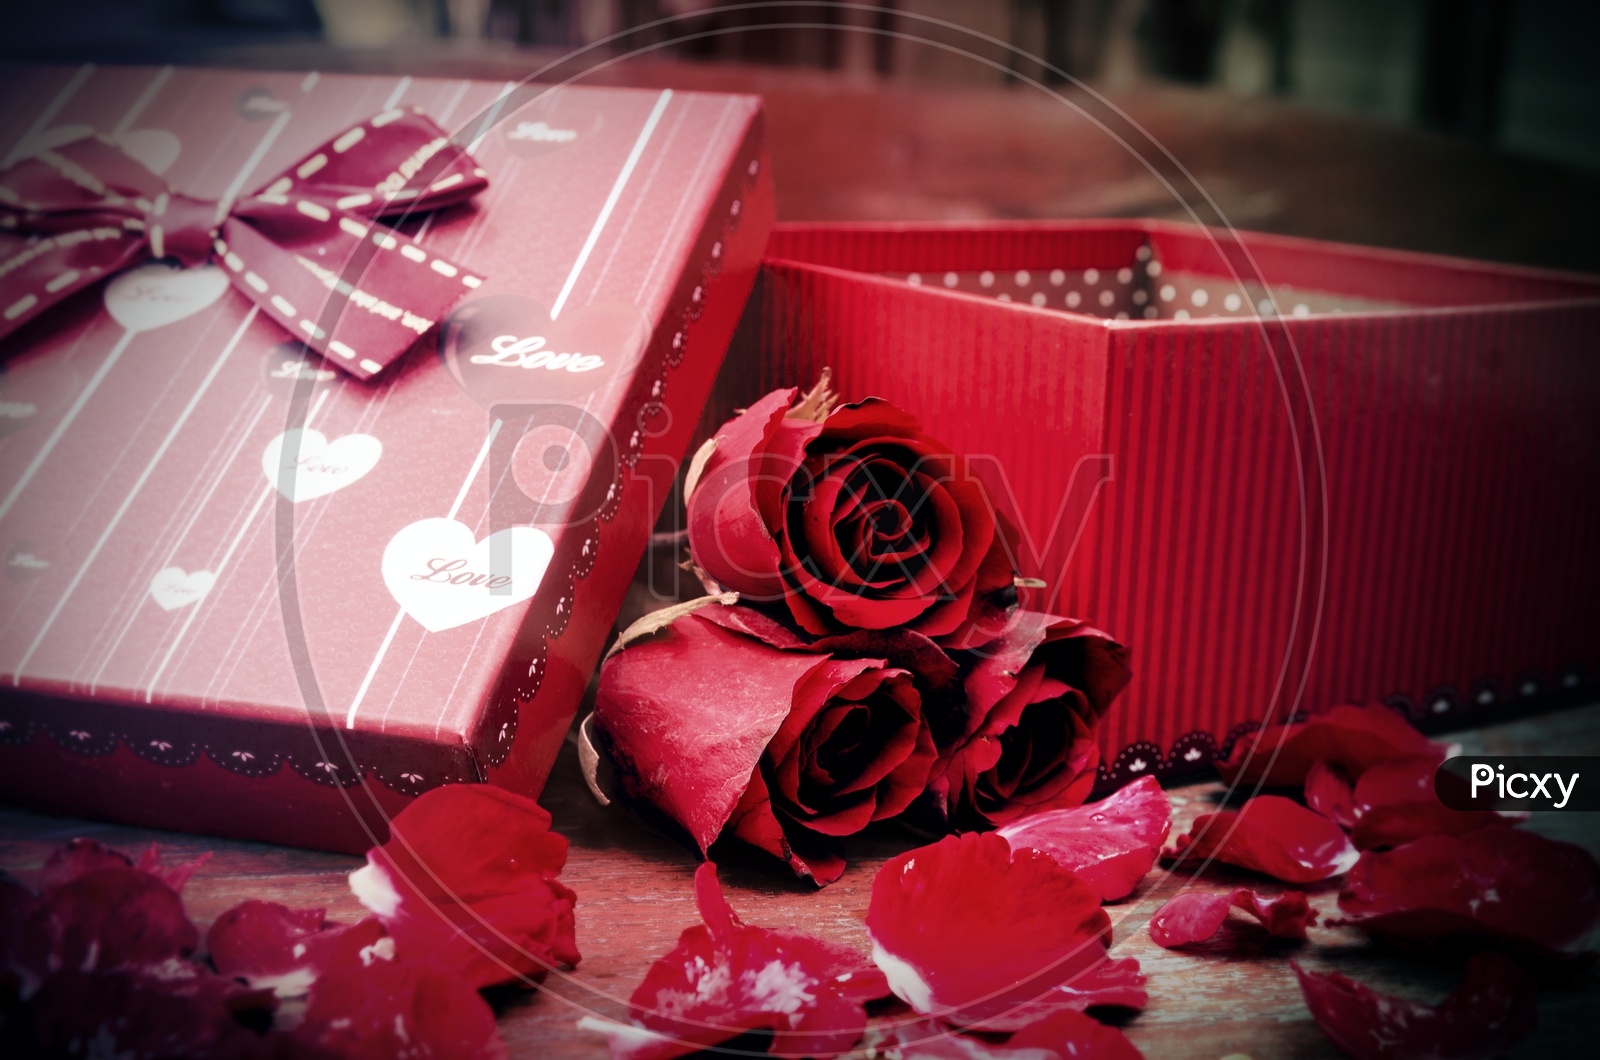 A Rose Gift Box idea for Valentines Day